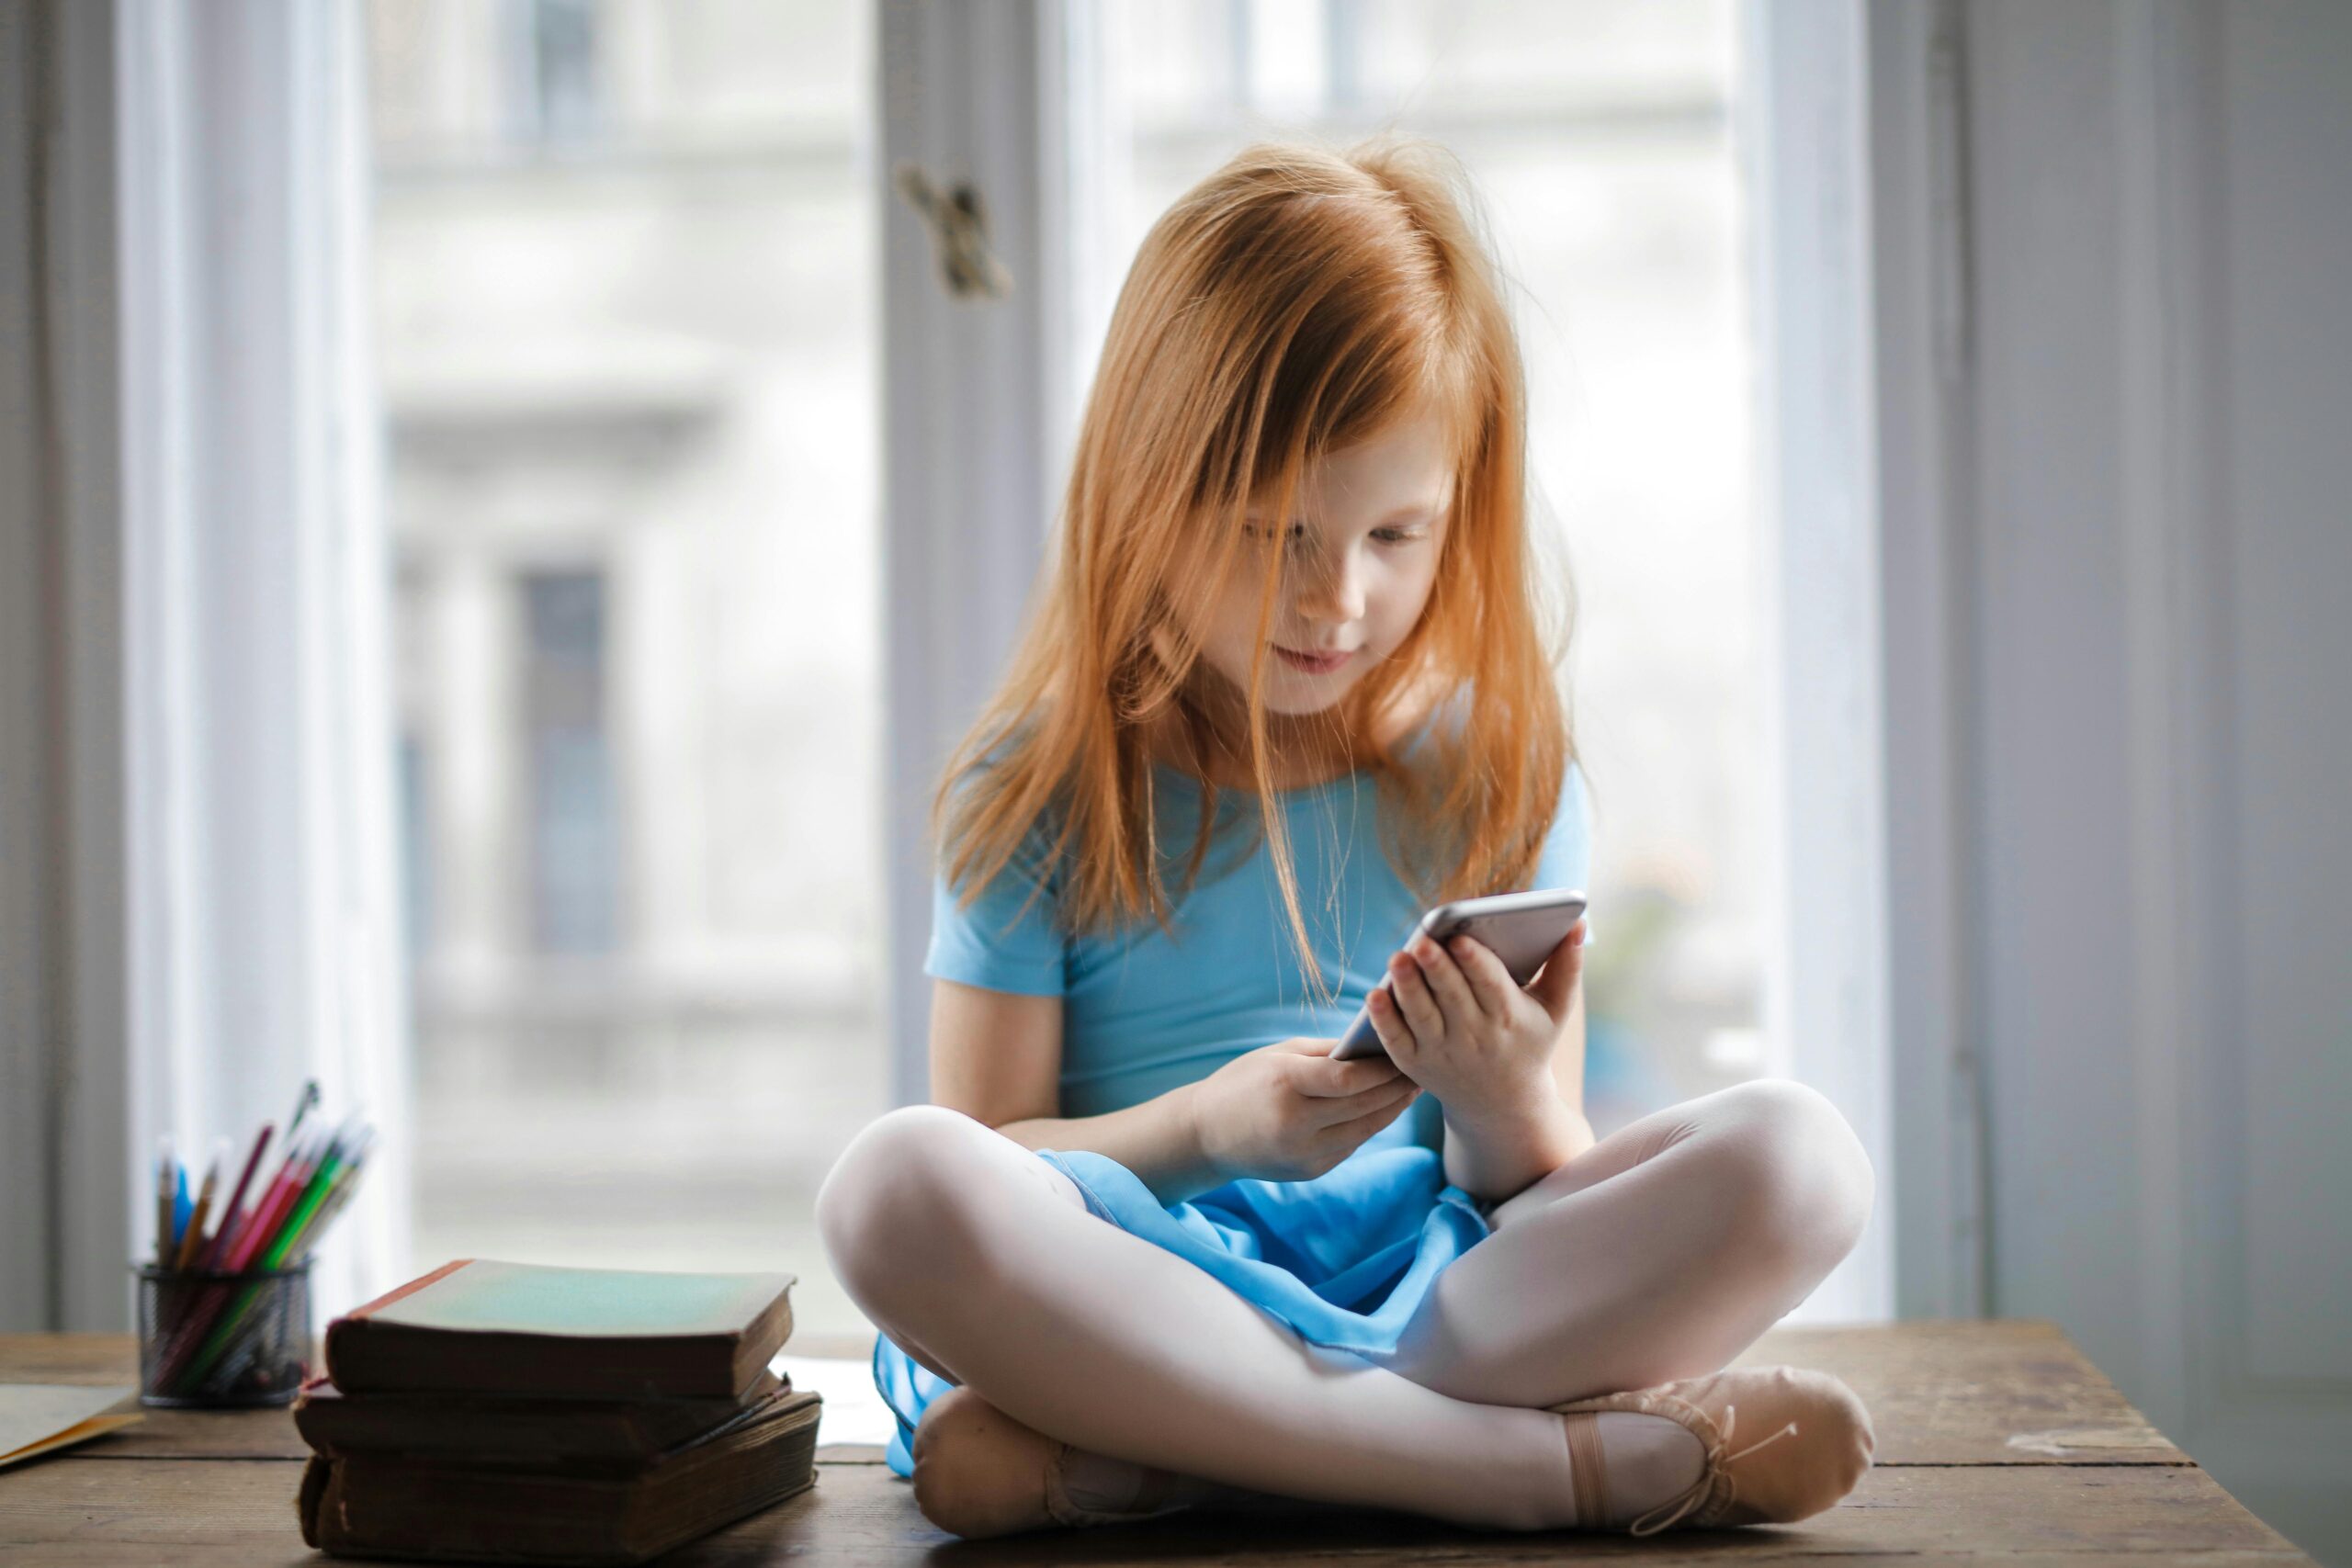 young girl looking at a smartphone